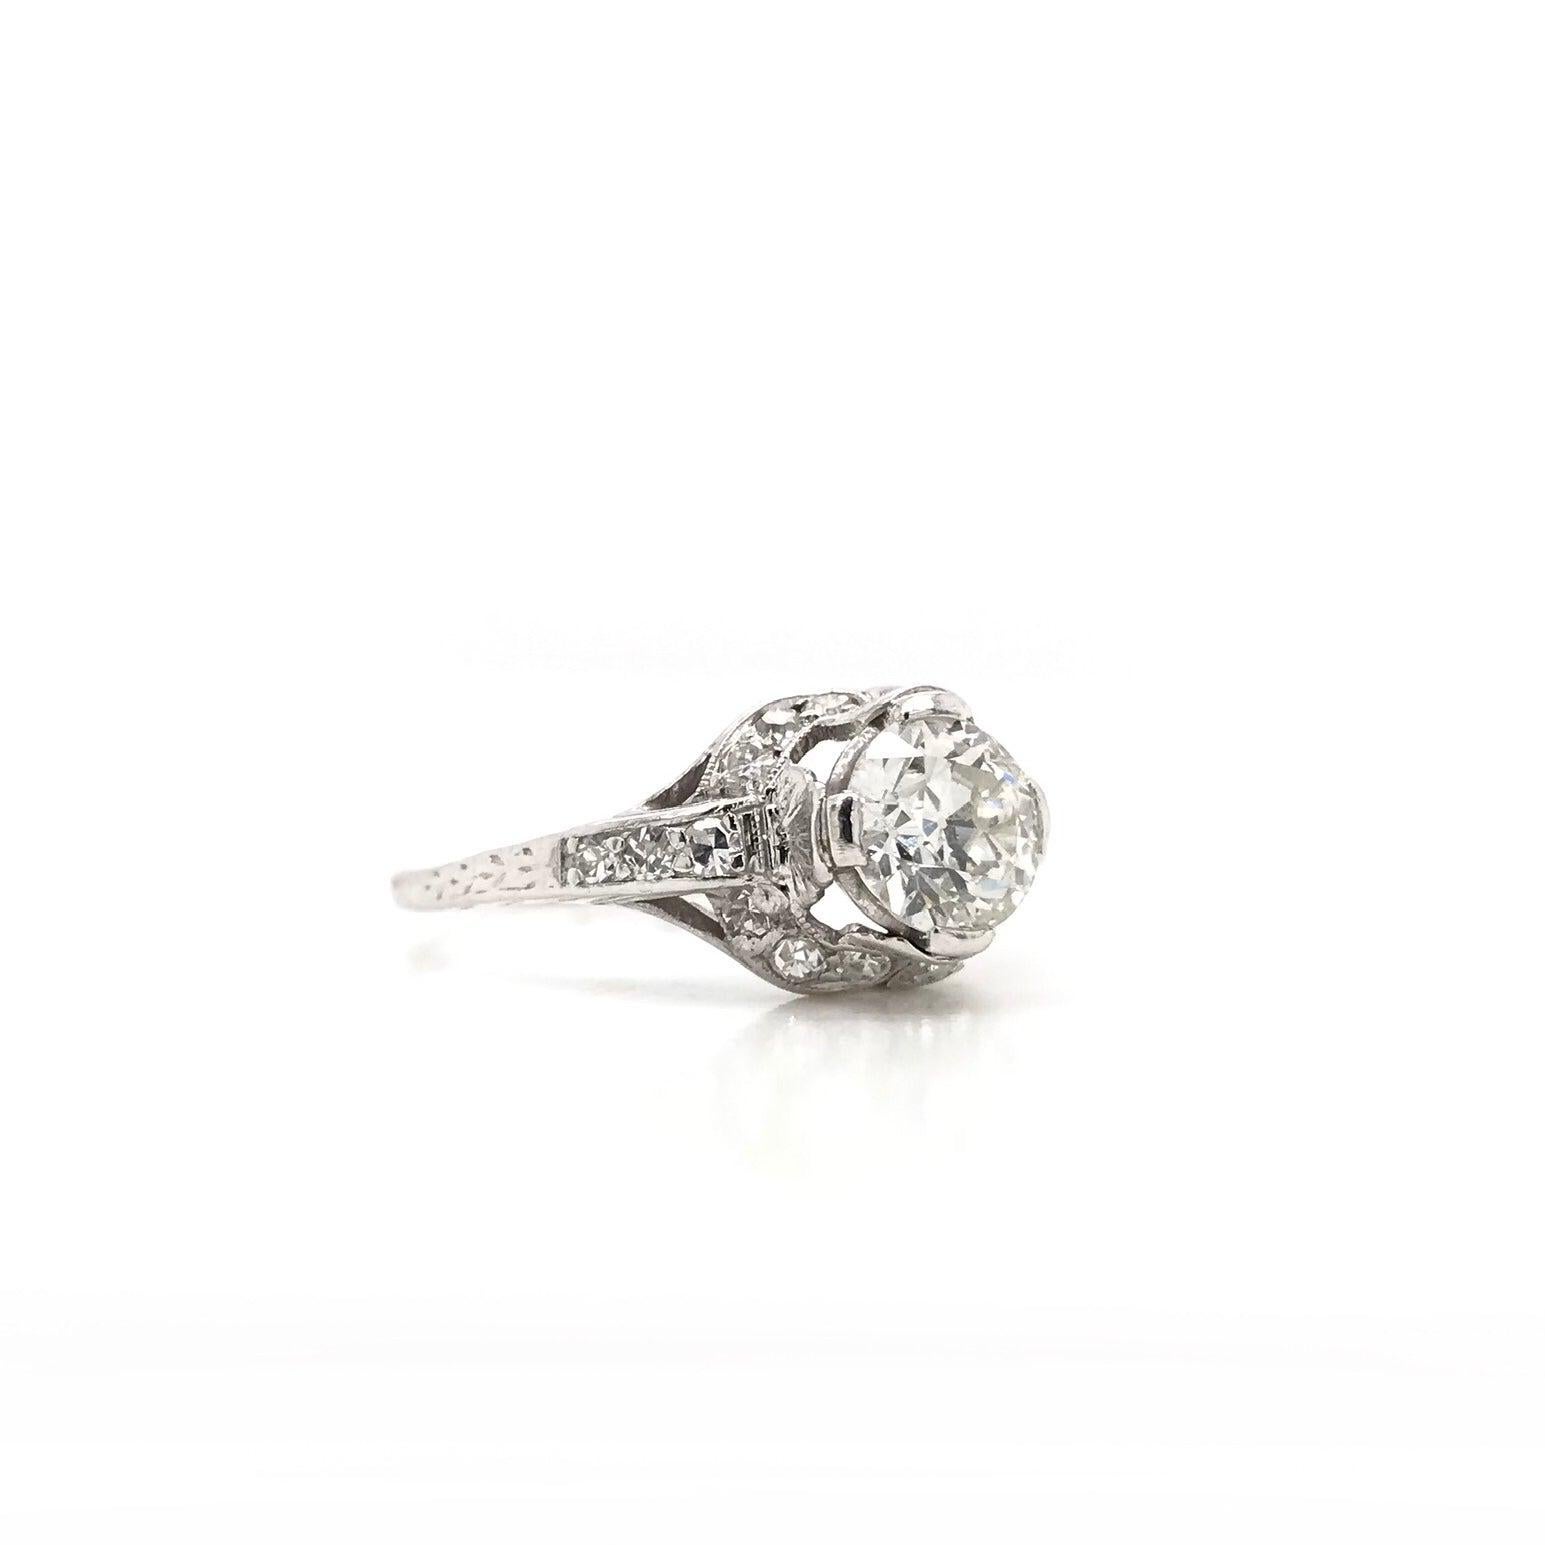 Antique Edwardian 0.90 Carat Diamond and Platinum Filigree Ring In Good Condition For Sale In Montgomery, AL